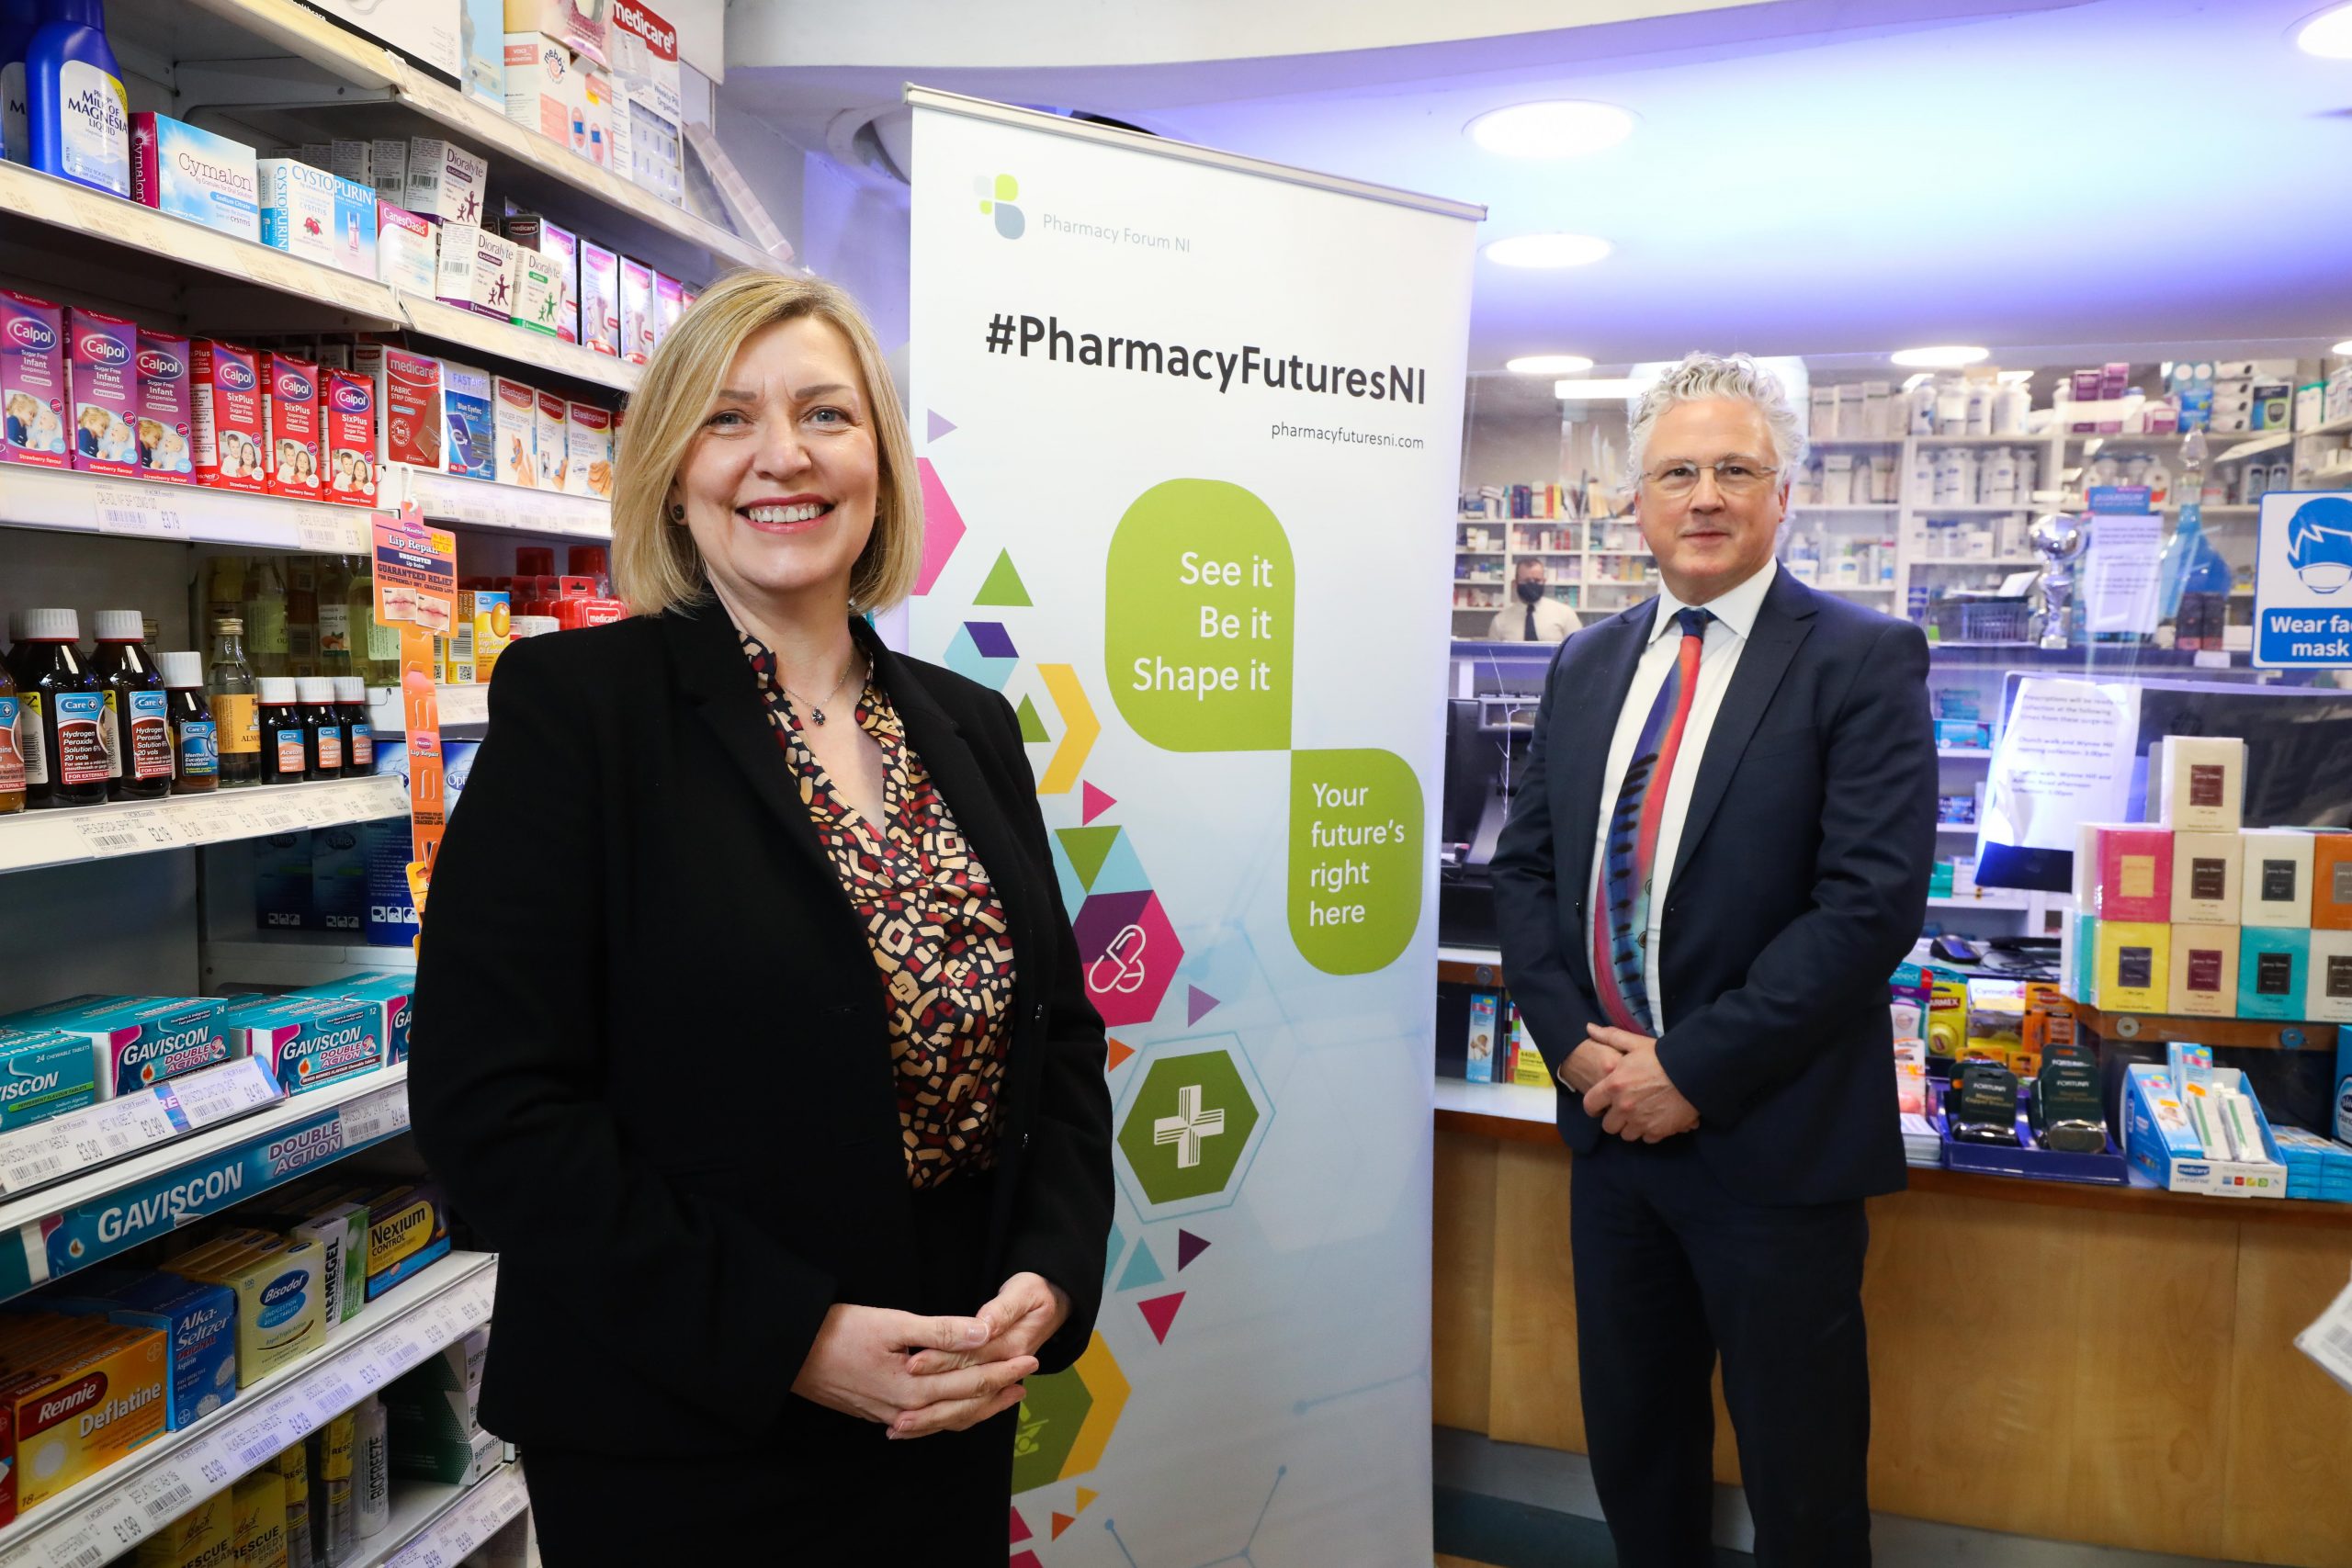 Pharmacy Futures NI Campaign Launched